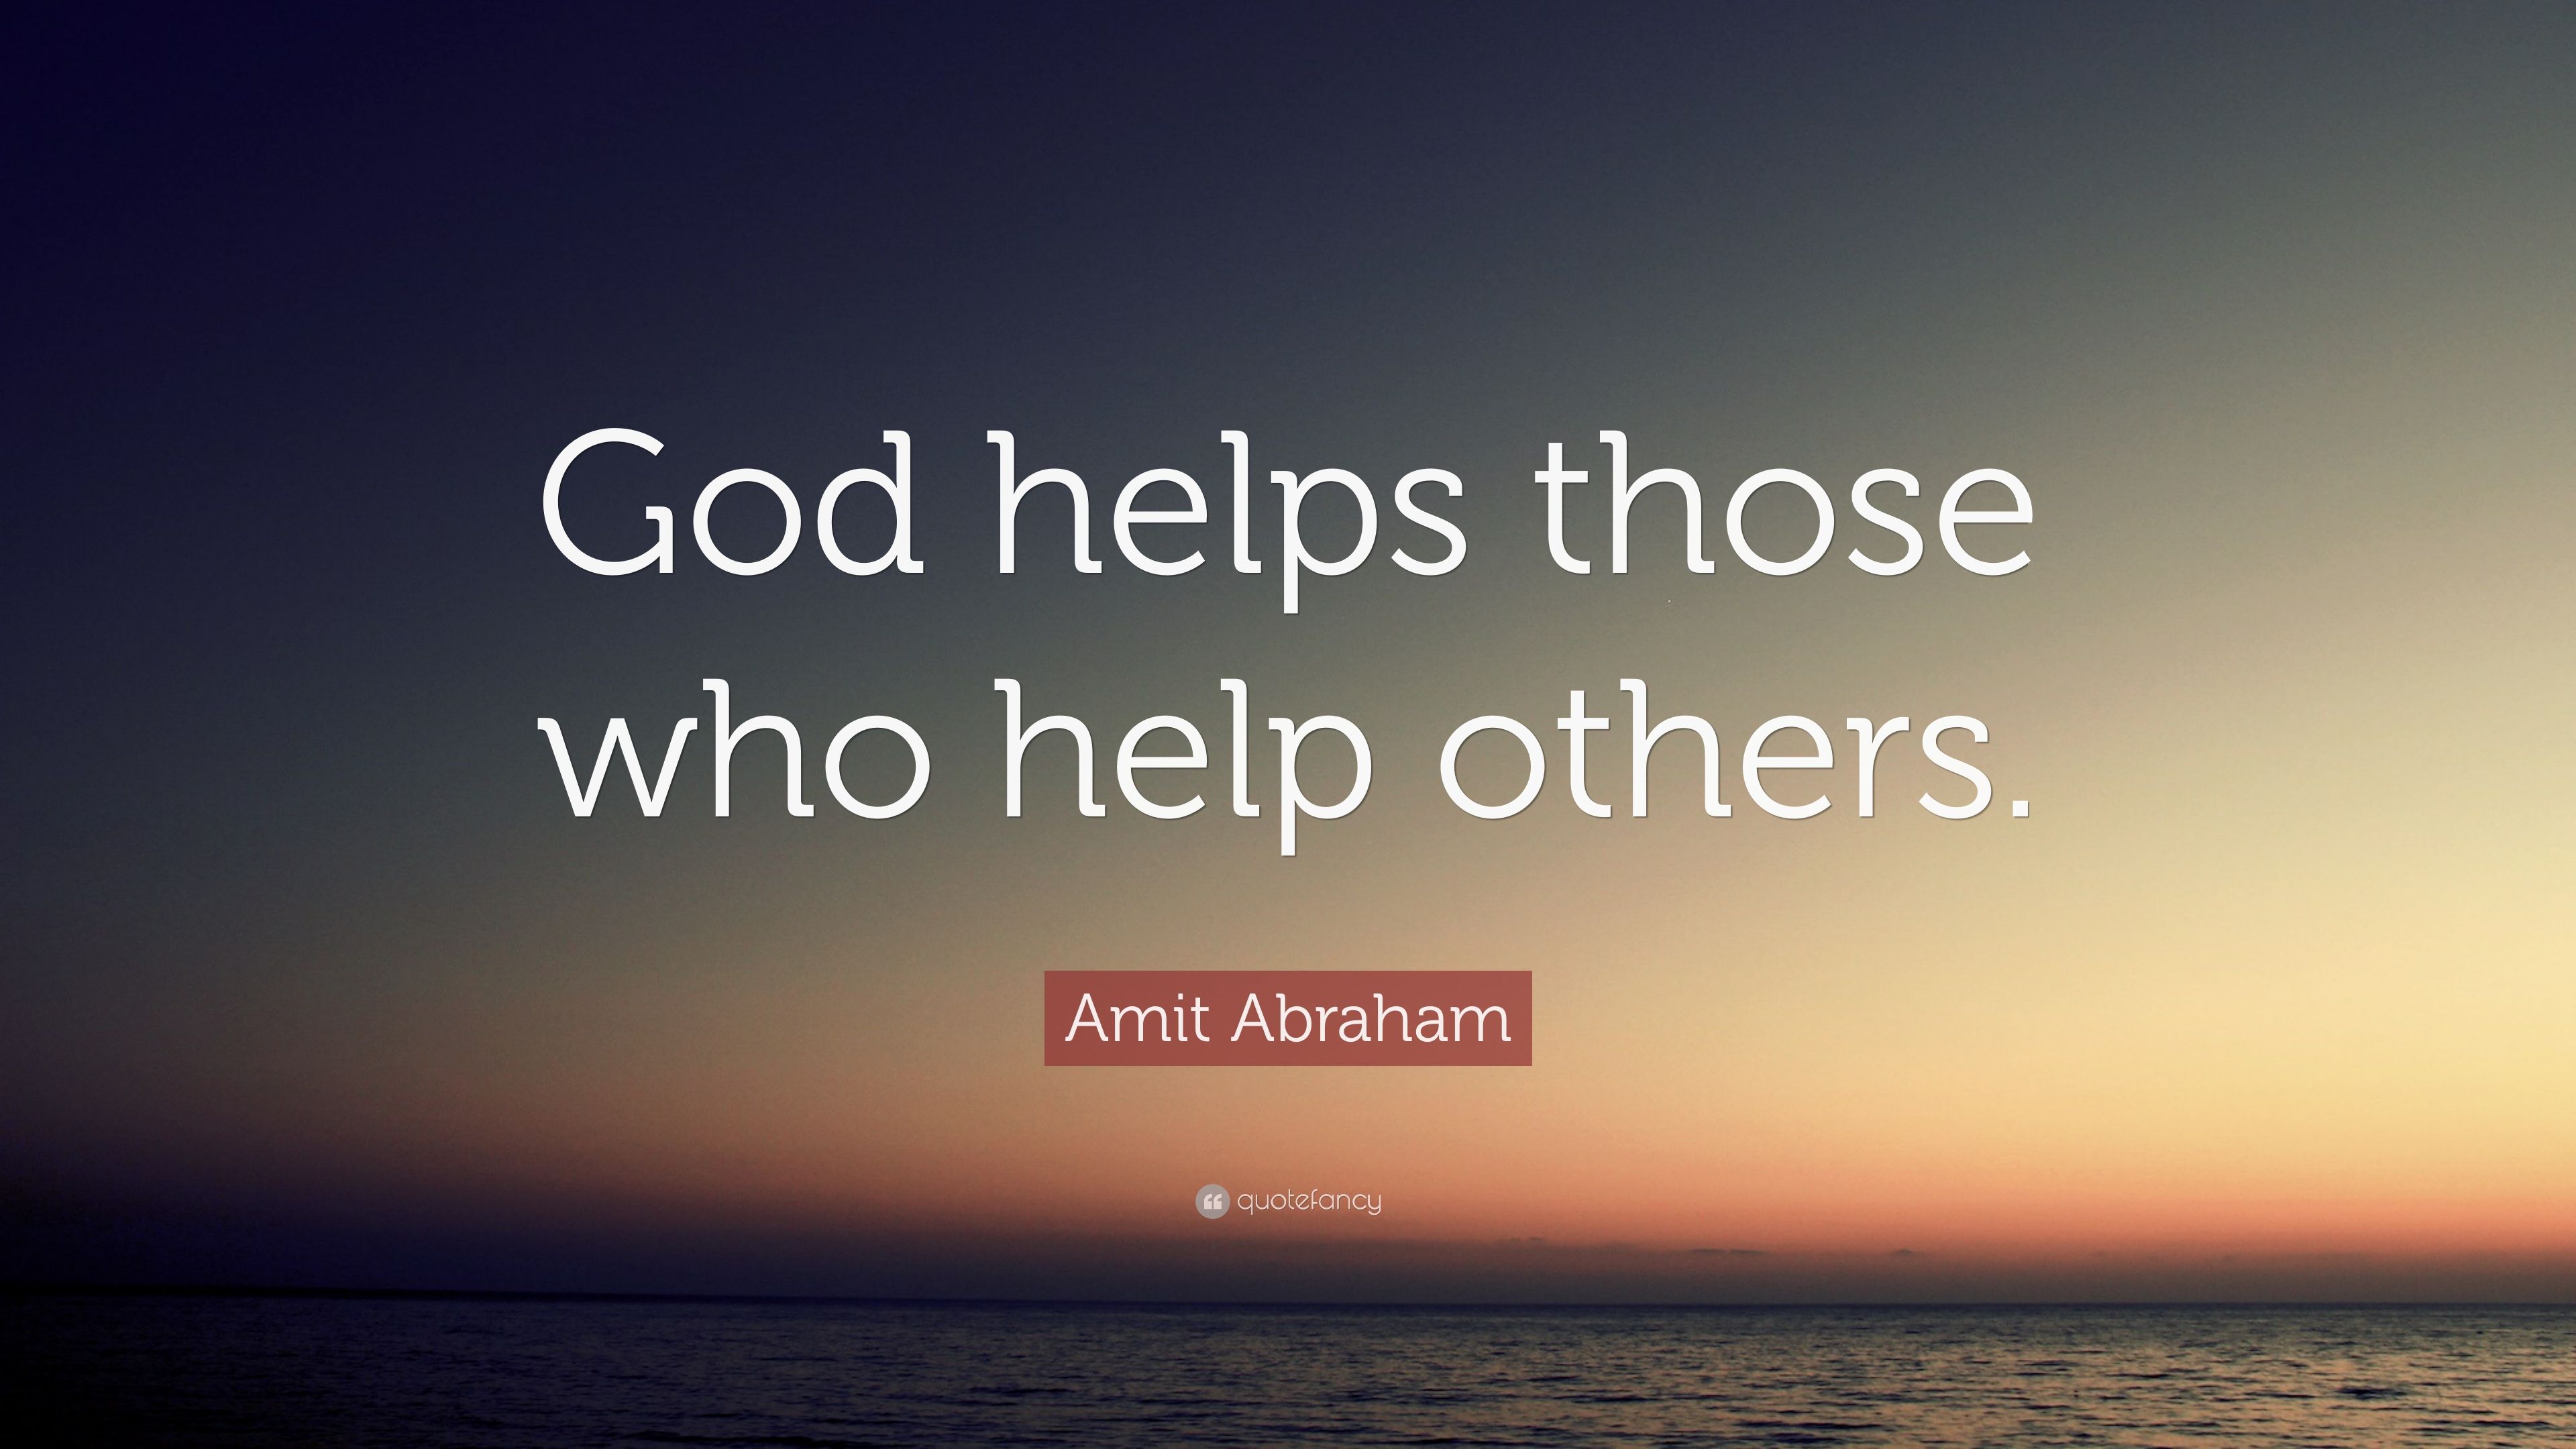 Amit Abraham Quote: “God helps those who help others.” (12 wallpaper)